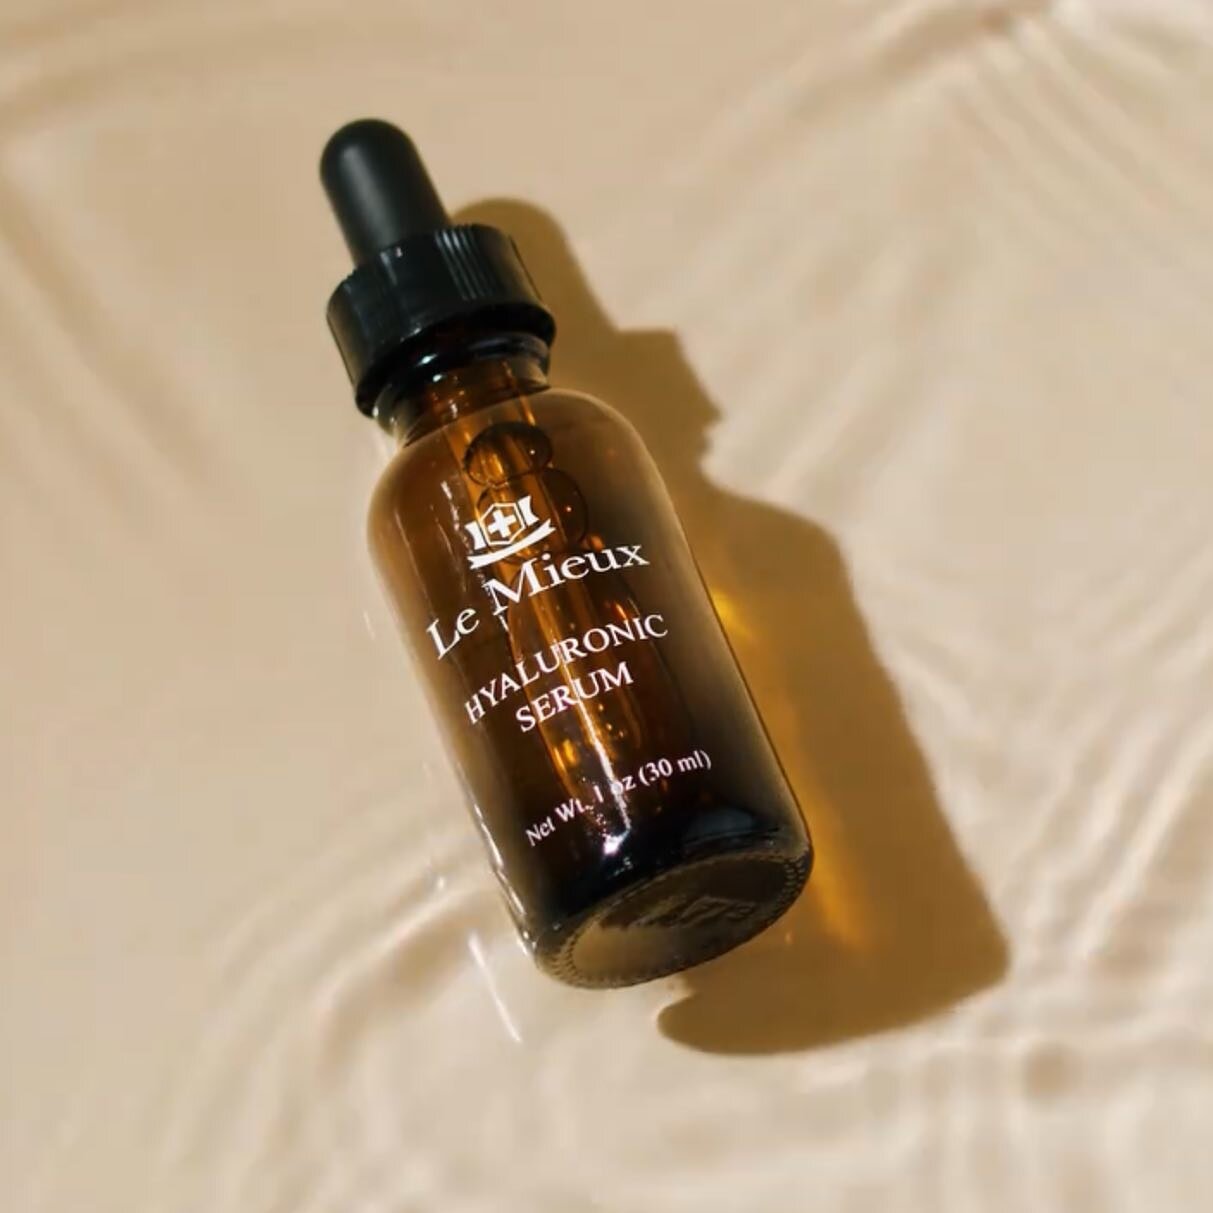 Hyaluronic Acid acts as a Humectant, soaks up moisture and holds onto it like a sponge to plump and hydrate the skin. Skin tip for using HA: use a hydration mist/toner, rose water, collagen spray before you add your HA. You can add this serum to your